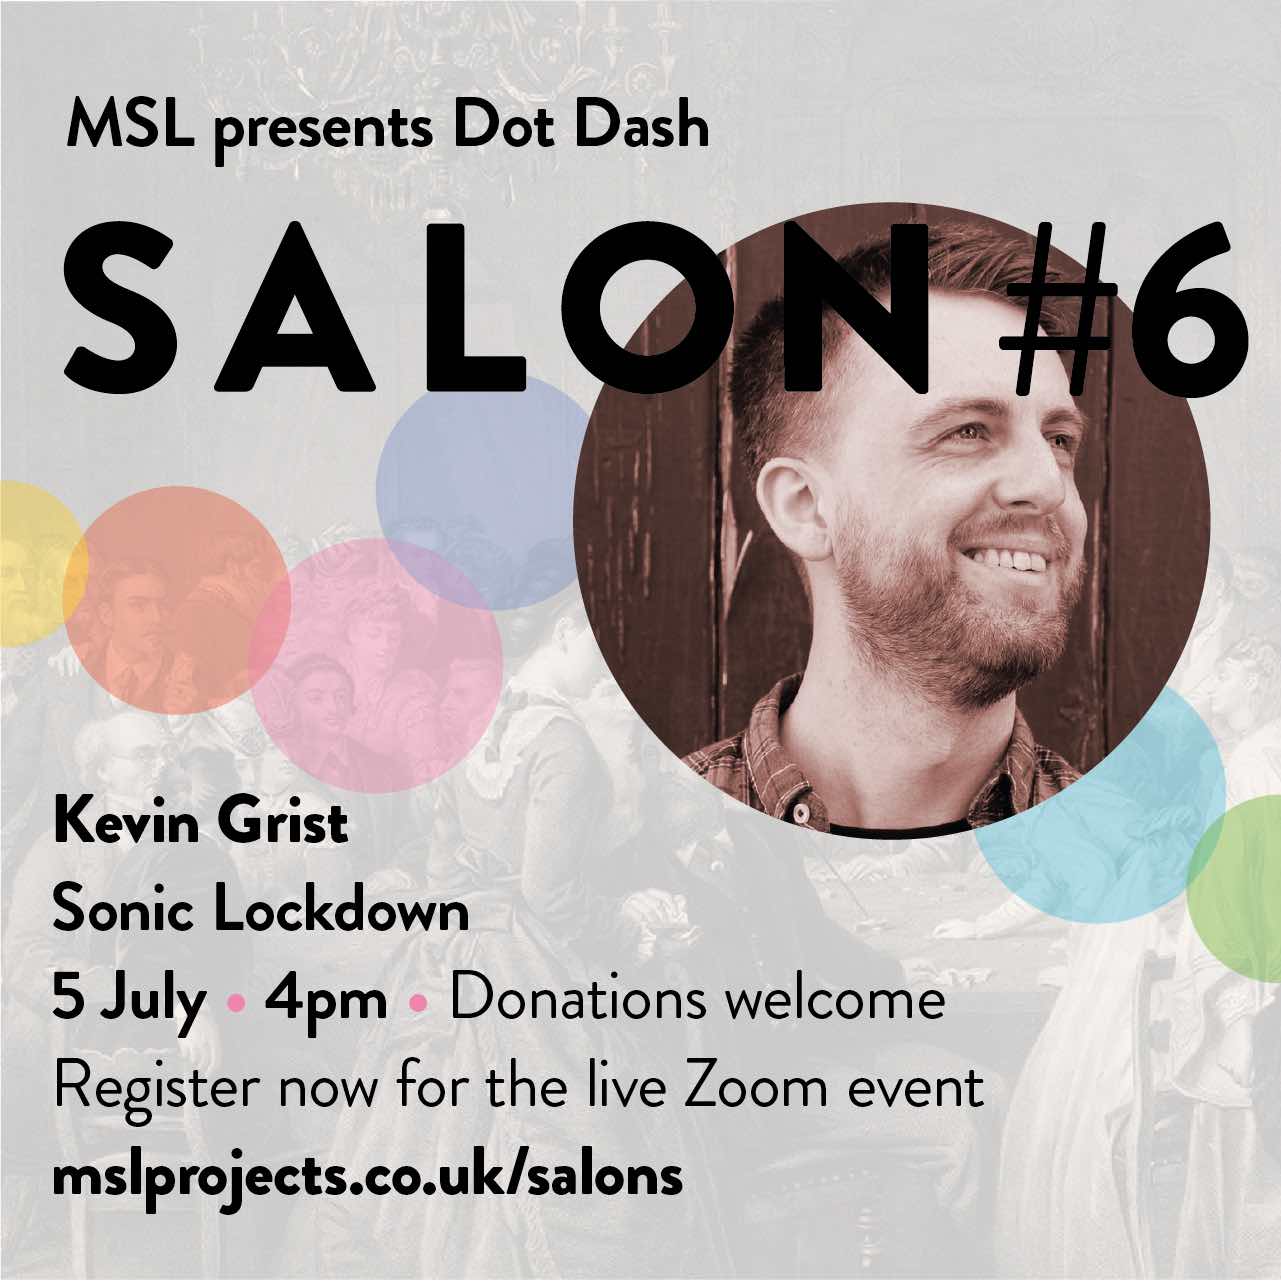 Salon 6 Sonic Lockdown Sunday 5 July 4pm for MSL Projects